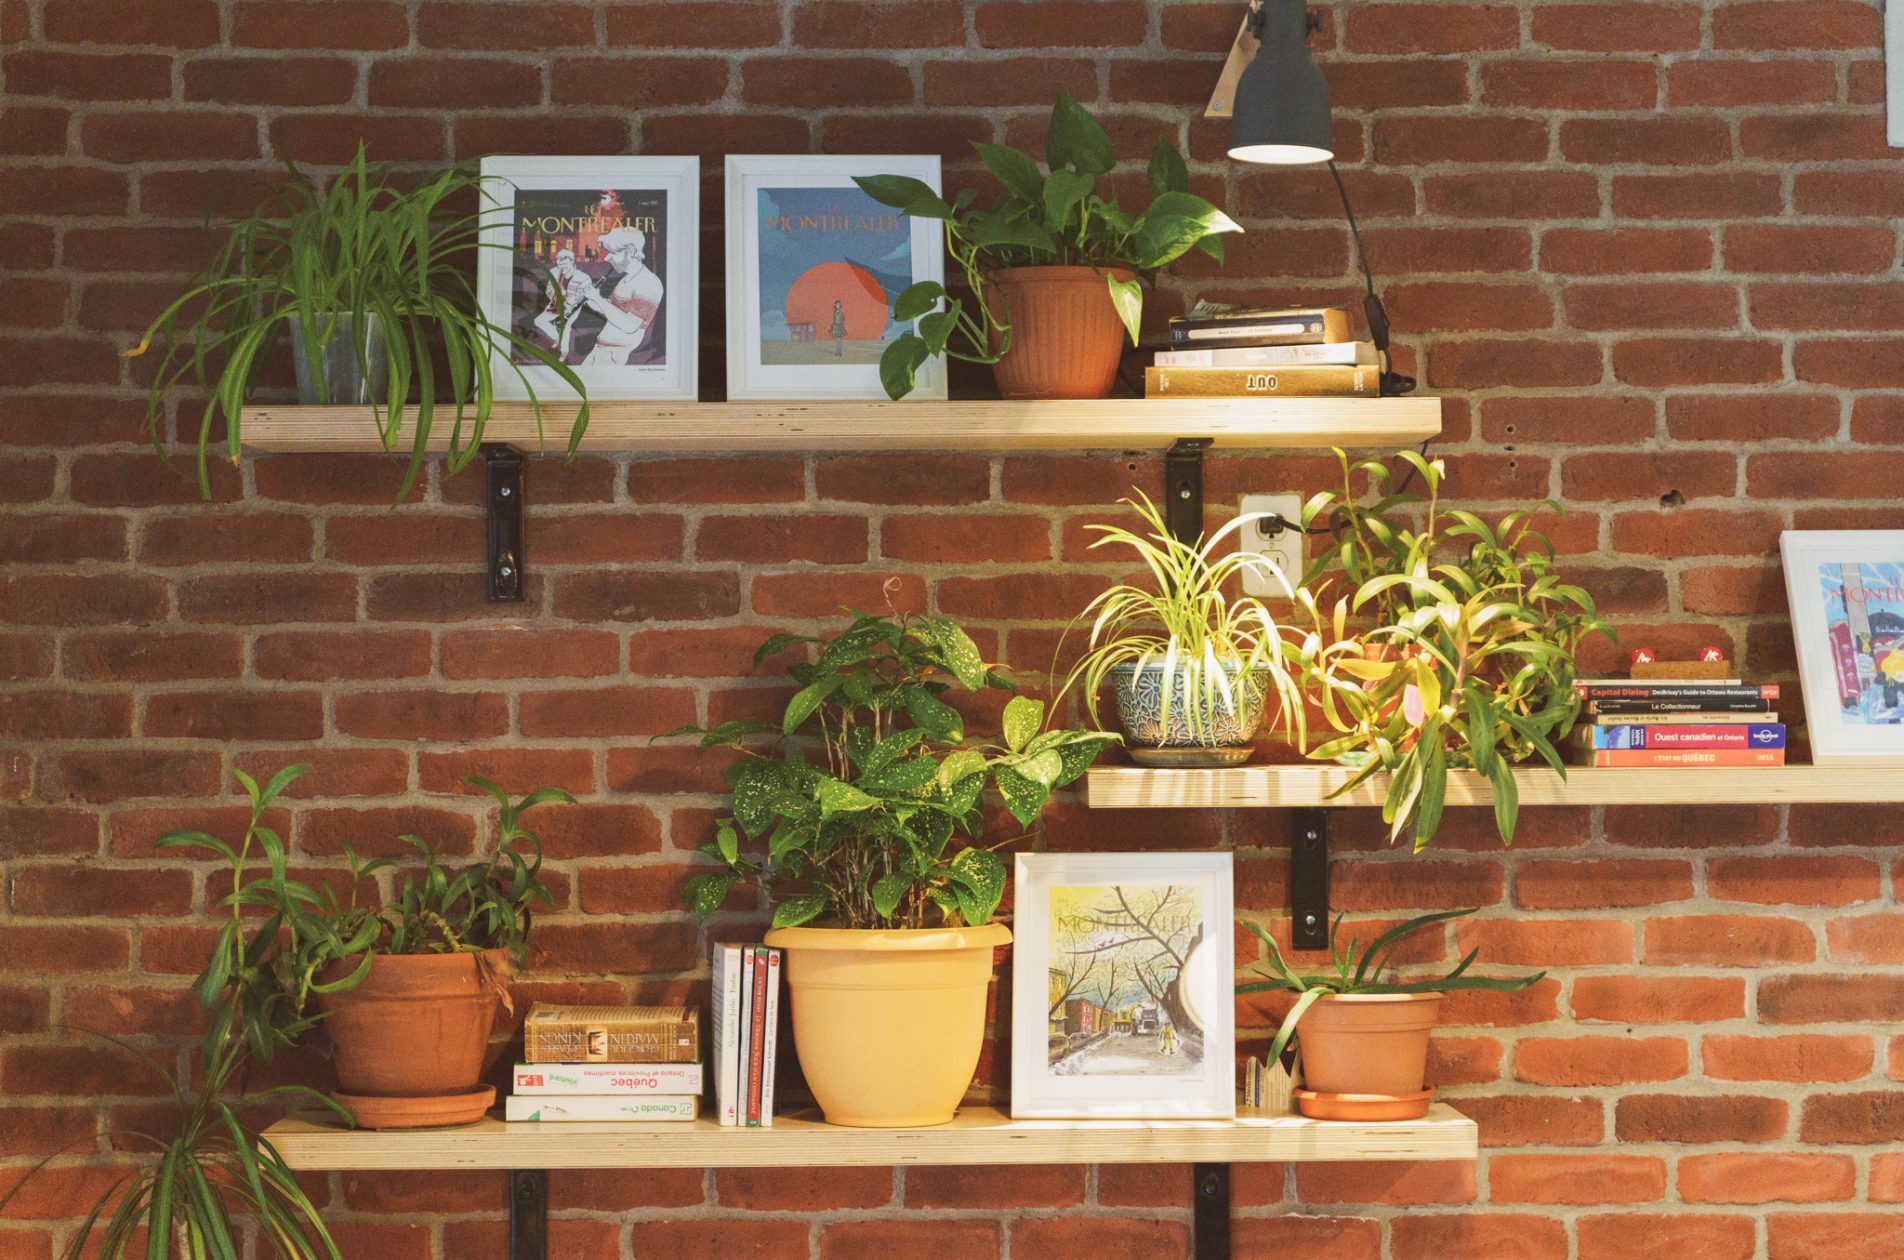 Shelves on the wall, with plants and books